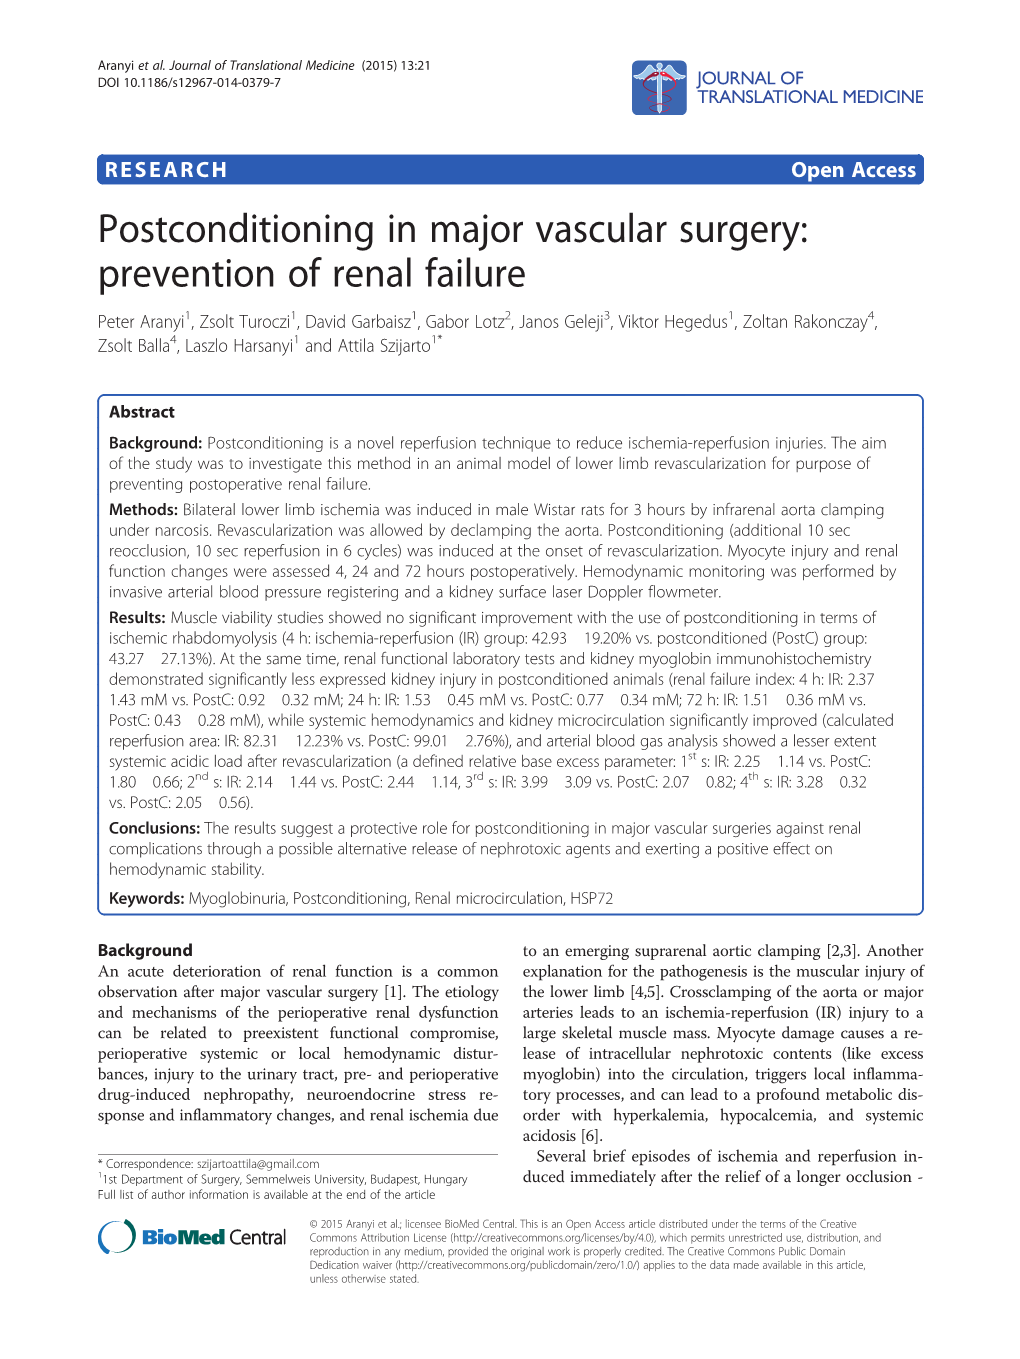 Postconditioning in Major Vascular Surgery: Prevention of Renal Failure